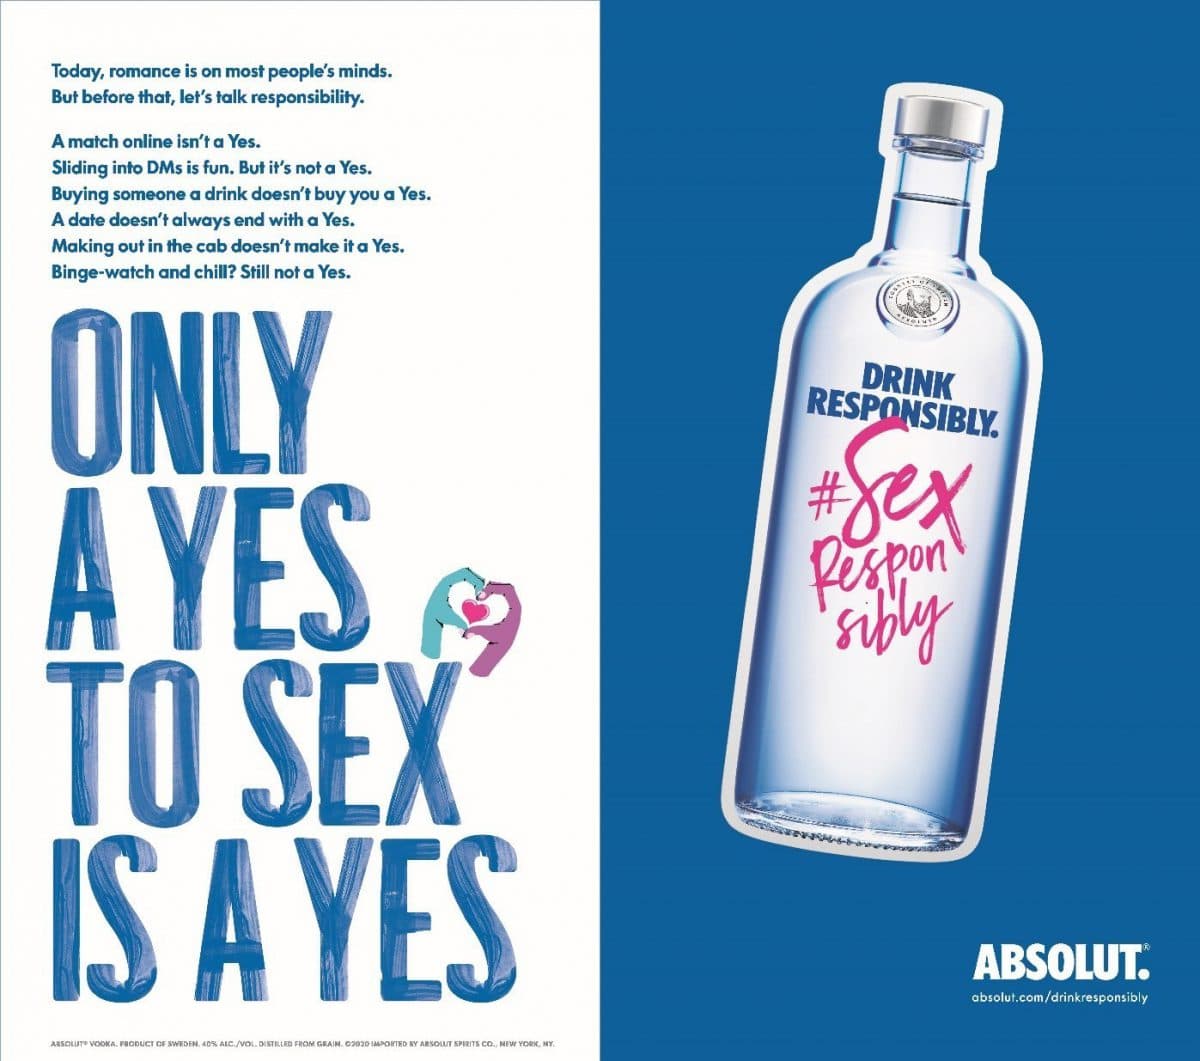 Absolut Vodka Launches #sexresponsibly Campaign photo